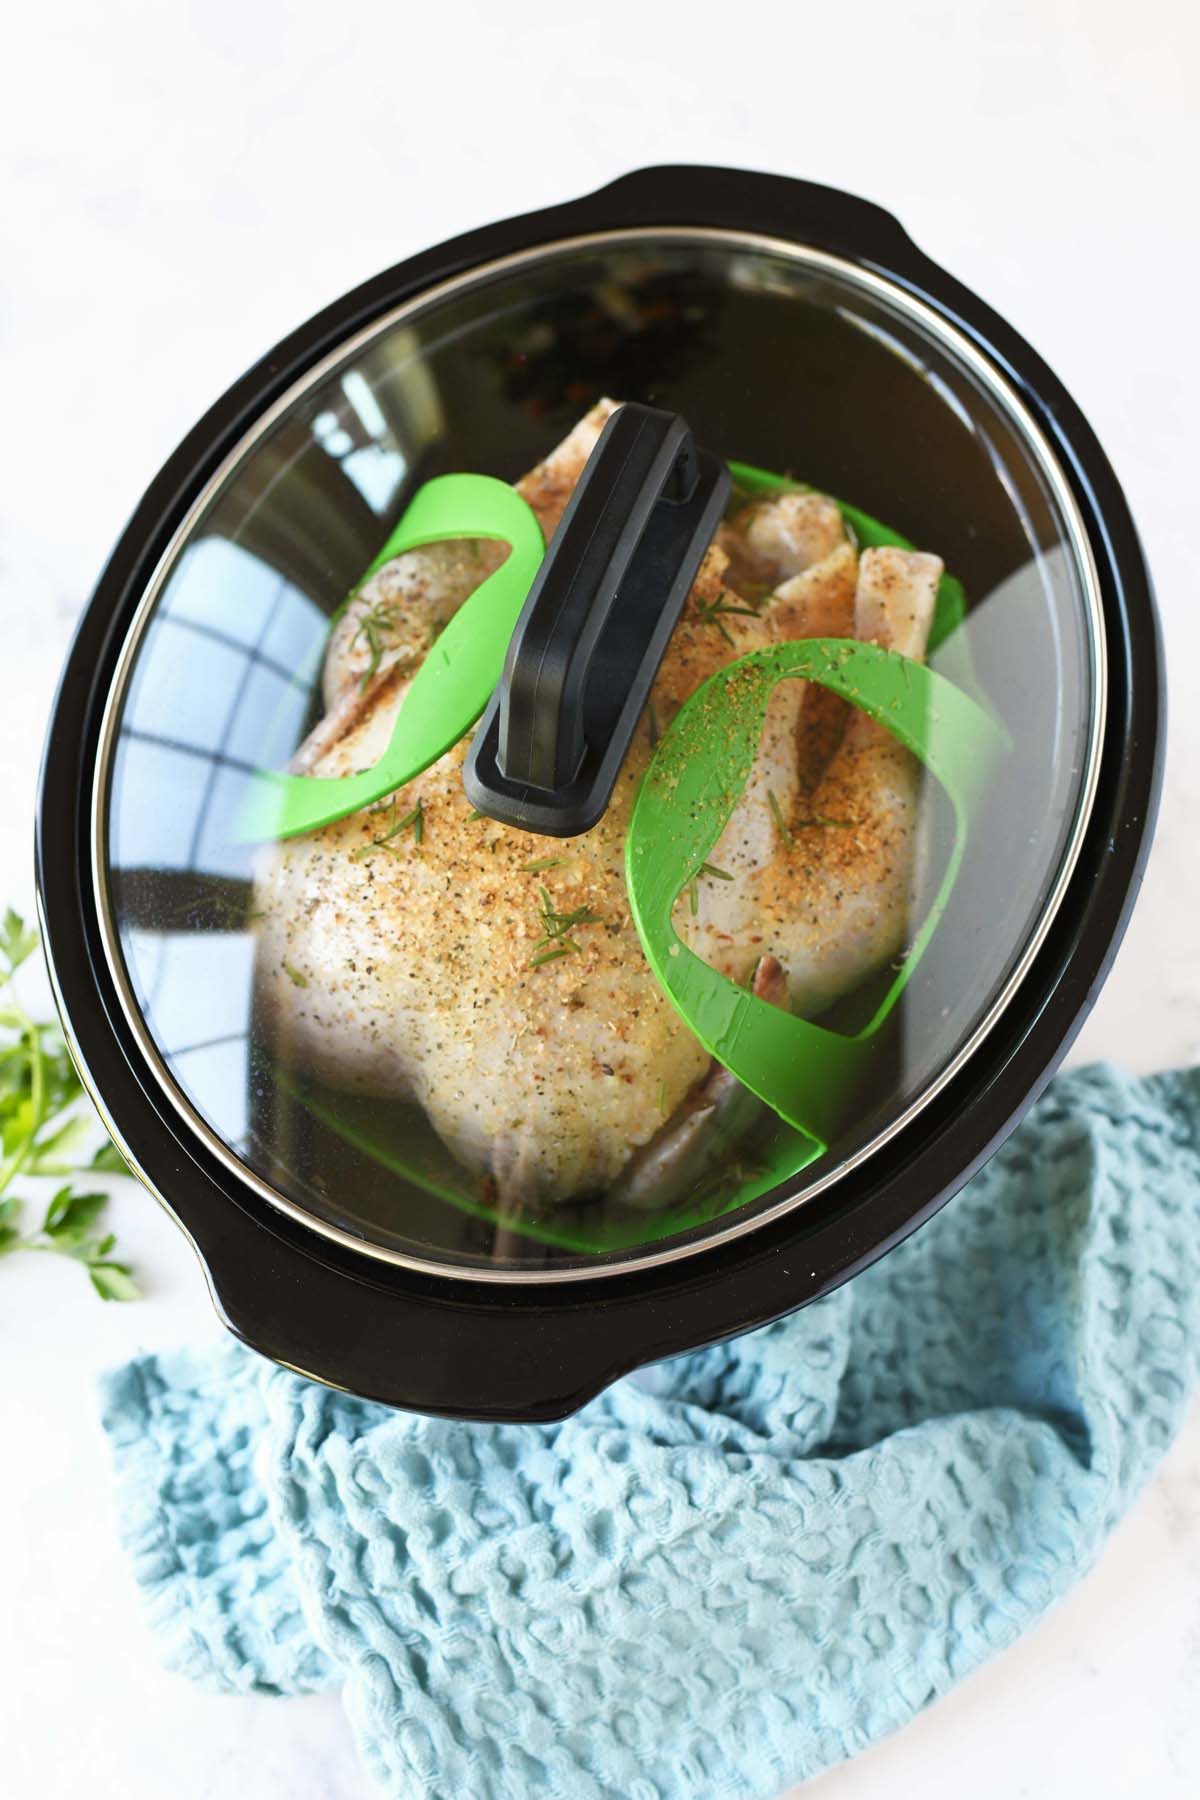 Chicken in a black Slow Cooker.